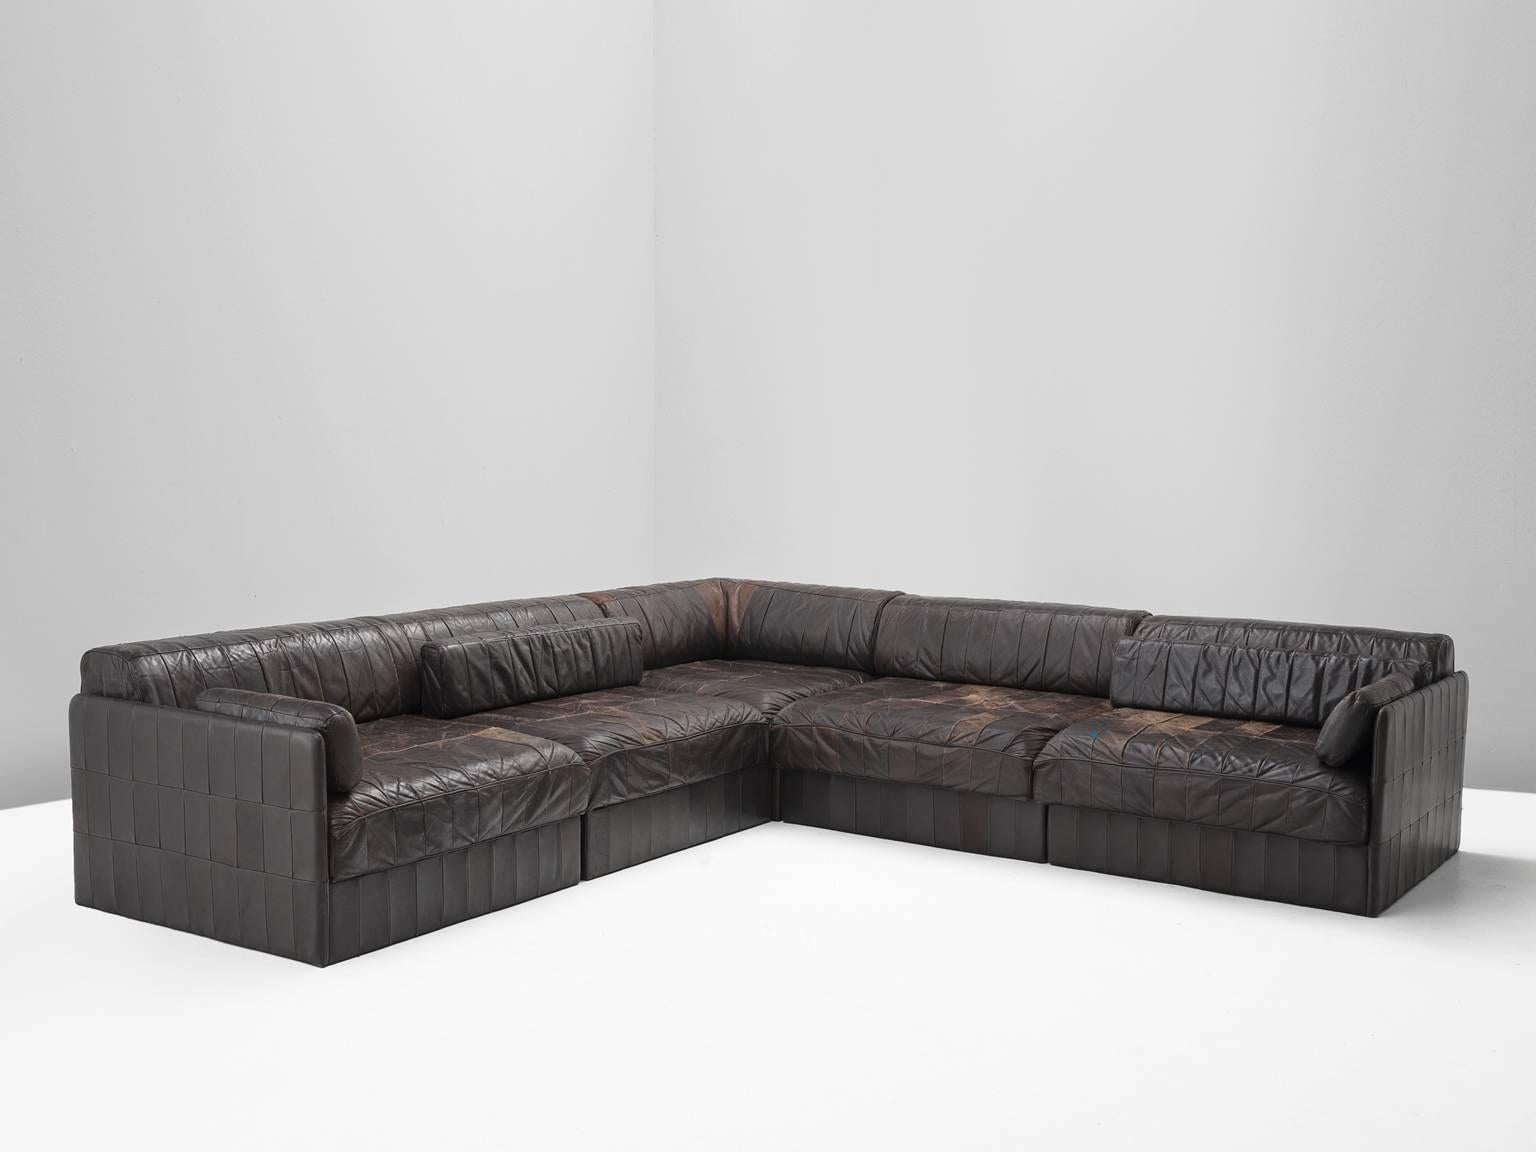 Sofa, DS 88, dark brown patinated leather, 1970s. 

This comfortable leather sofa is manufactured by De Sede in Switzerland. Sectional sofa by the Swiss quality manufacturer De Sede. This sofa consists of five elements. The cushions are upholstered